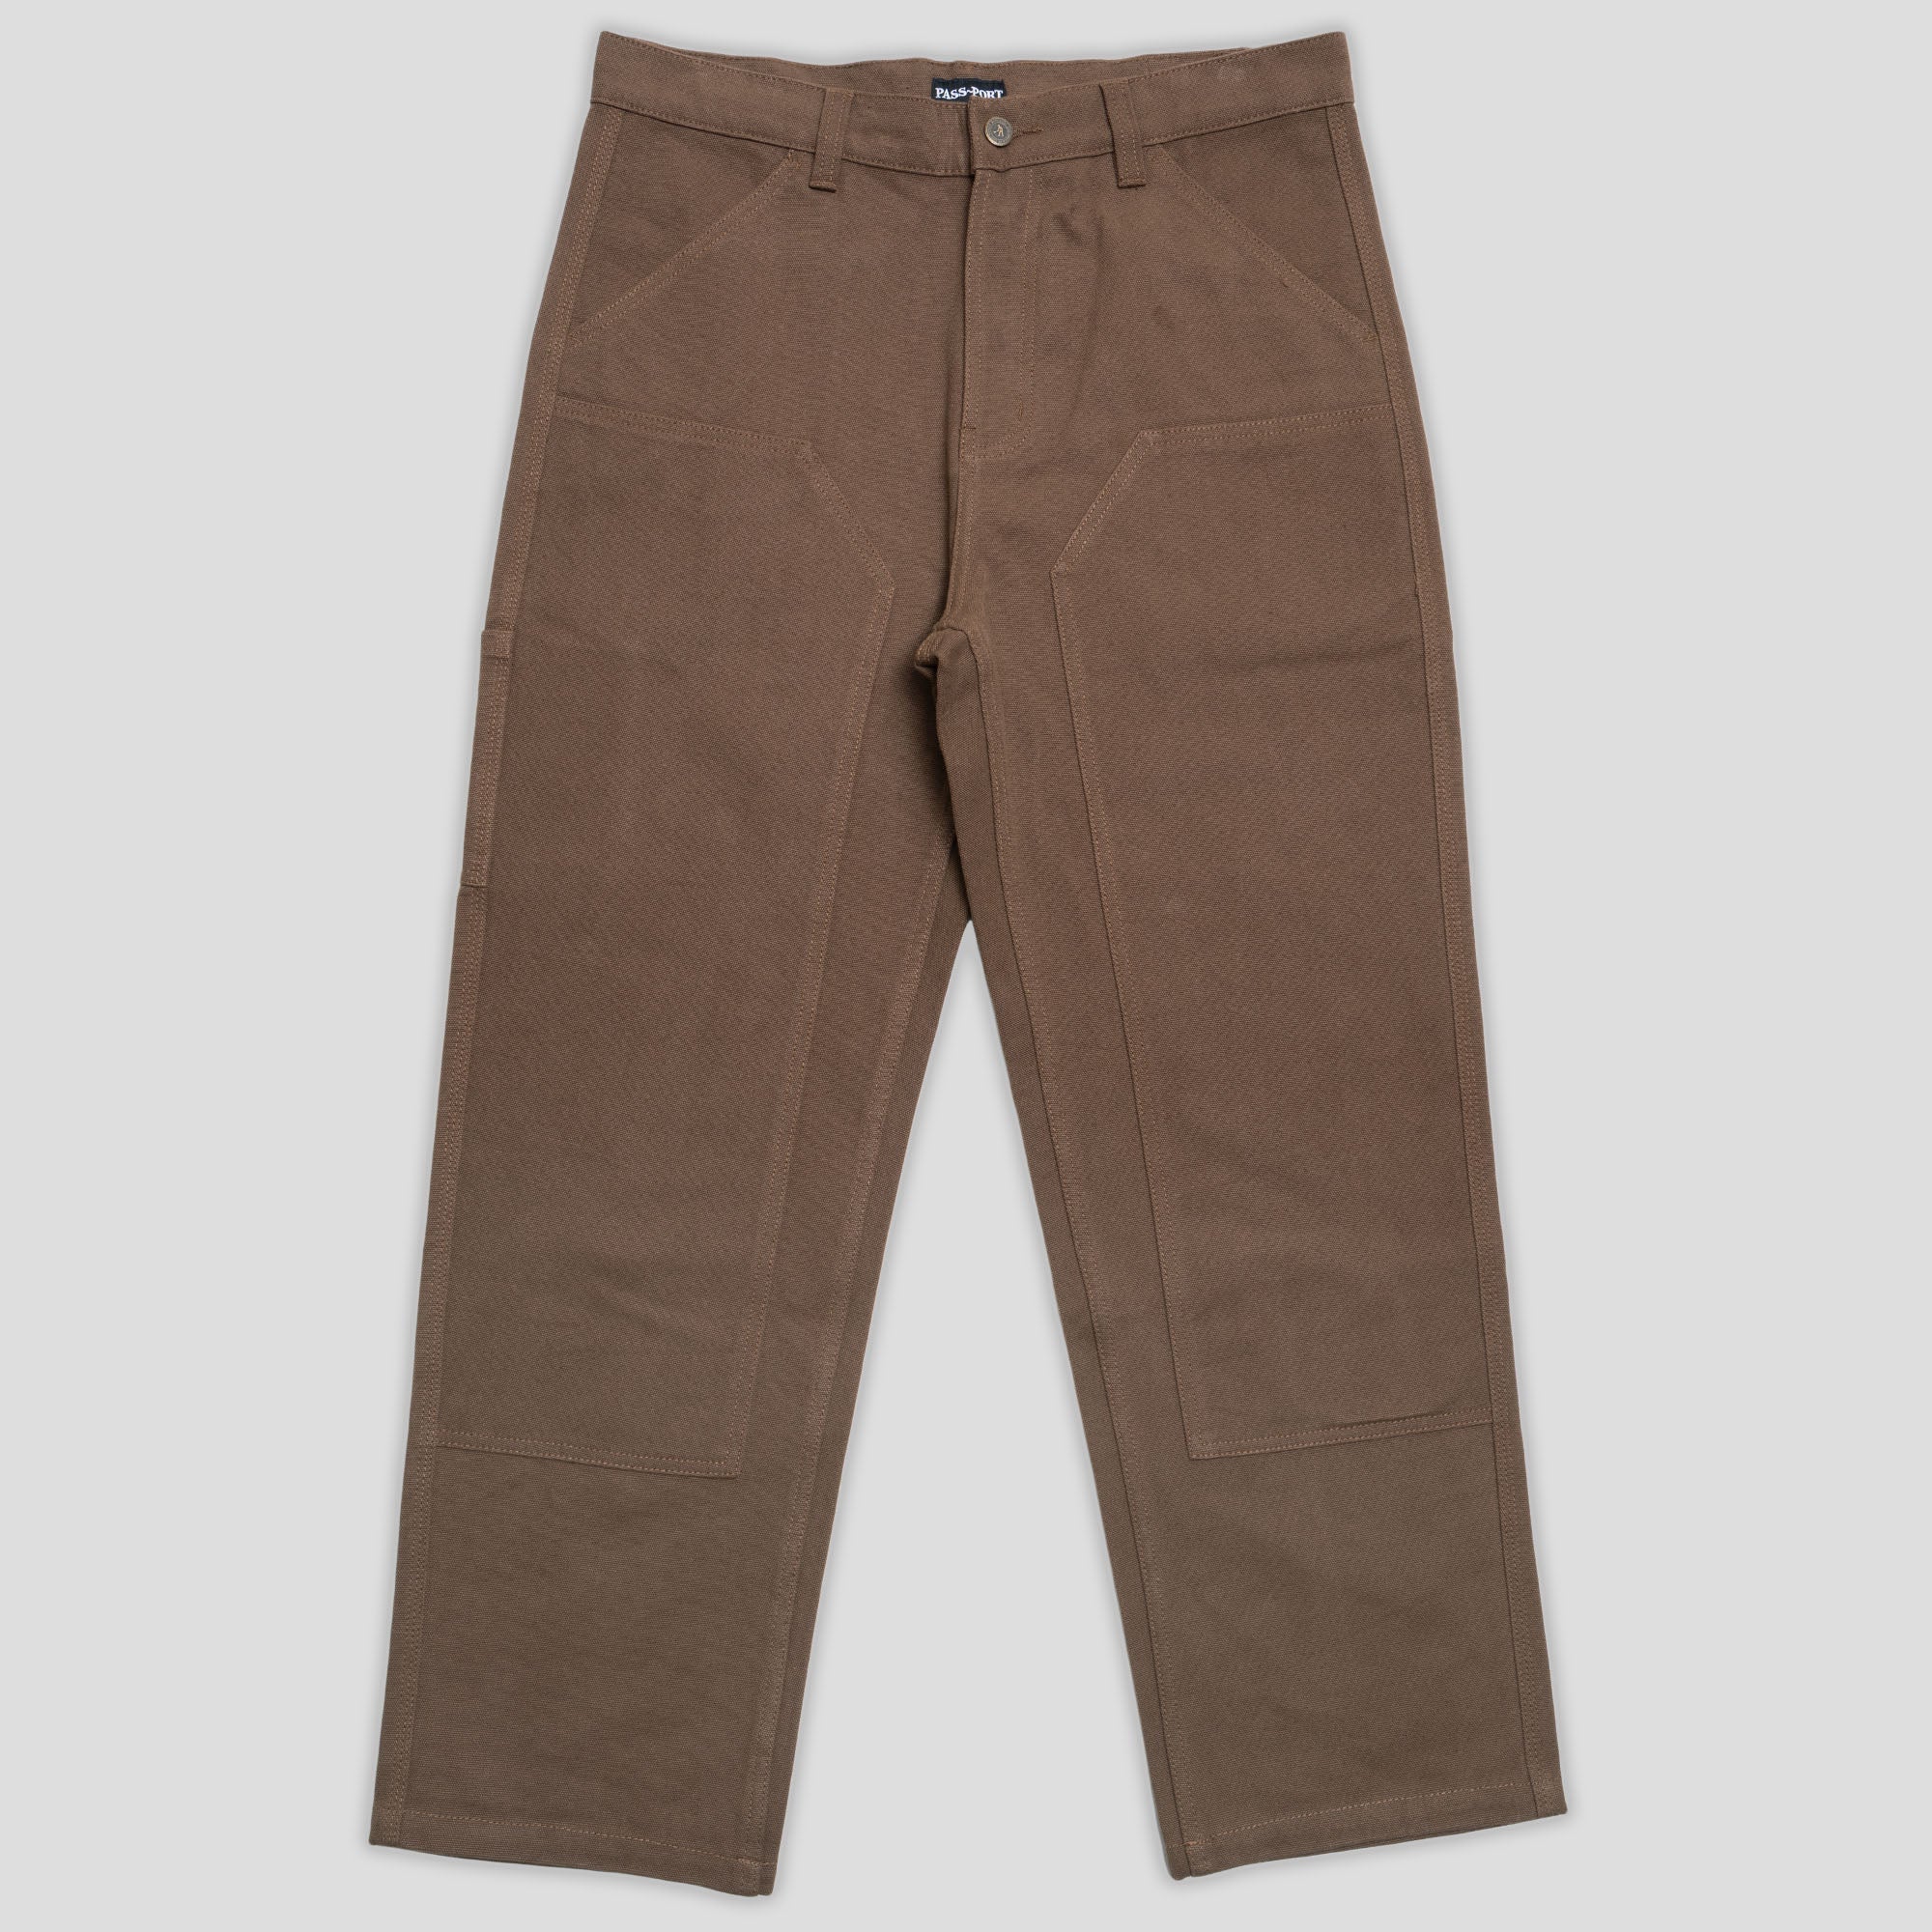 Pass~Port Double Knee Diggers Club Pant - Mud